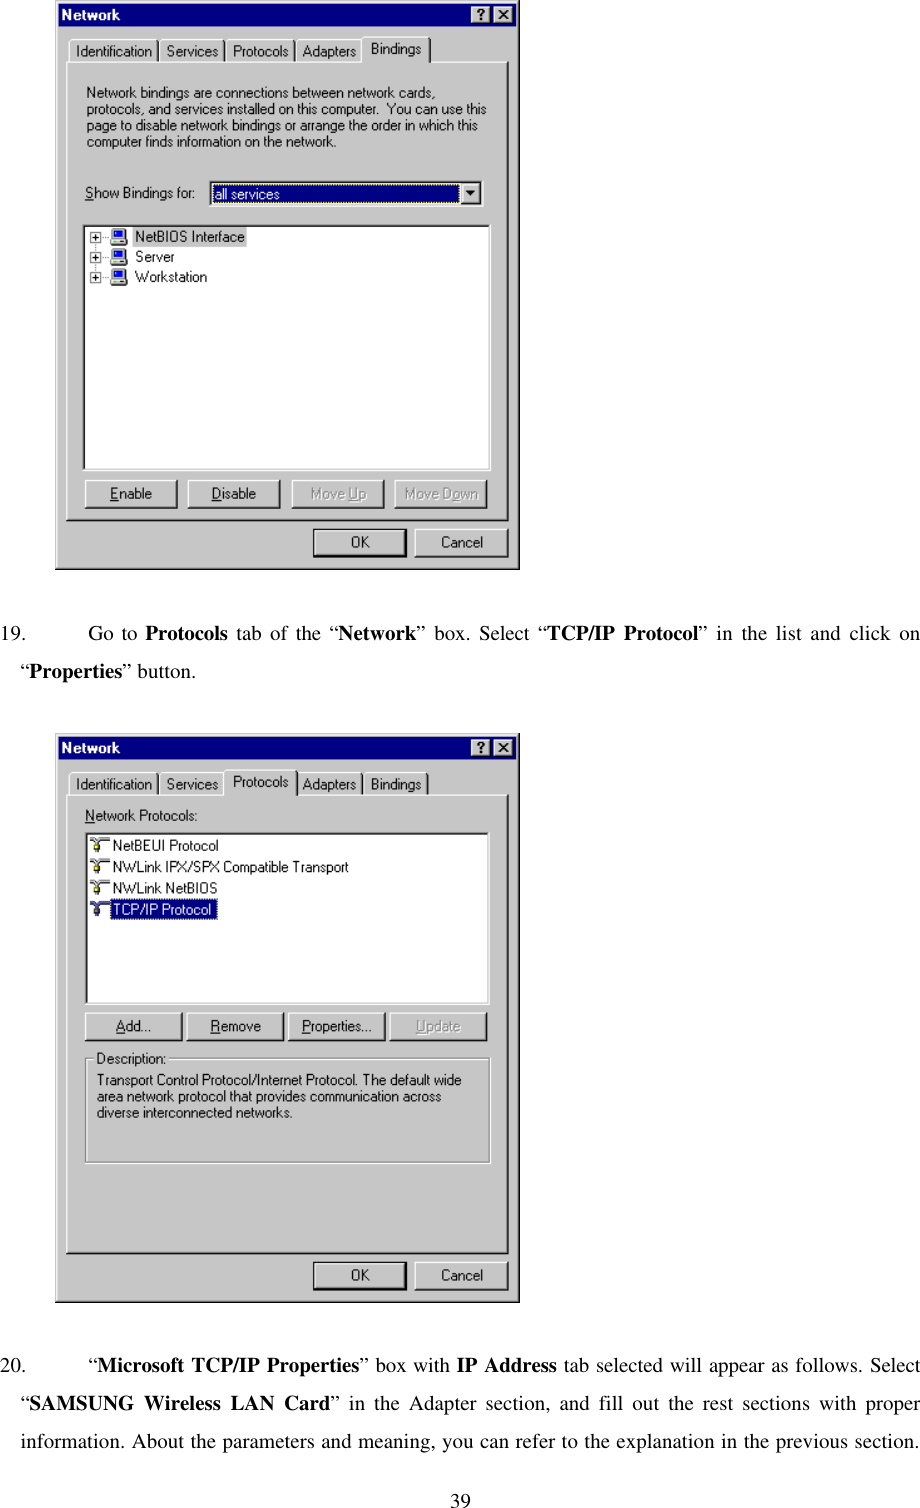  39             19. Go to Protocols tab of the “Network” box. Select “TCP/IP Protocol” in the list and click on “Properties” button.                20. “Microsoft TCP/IP Properties” box with IP Address tab selected will appear as follows. Select “SAMSUNG Wireless LAN Card” in the Adapter section, and fill out the rest sections with proper information. About the parameters and meaning, you can refer to the explanation in the previous section. 